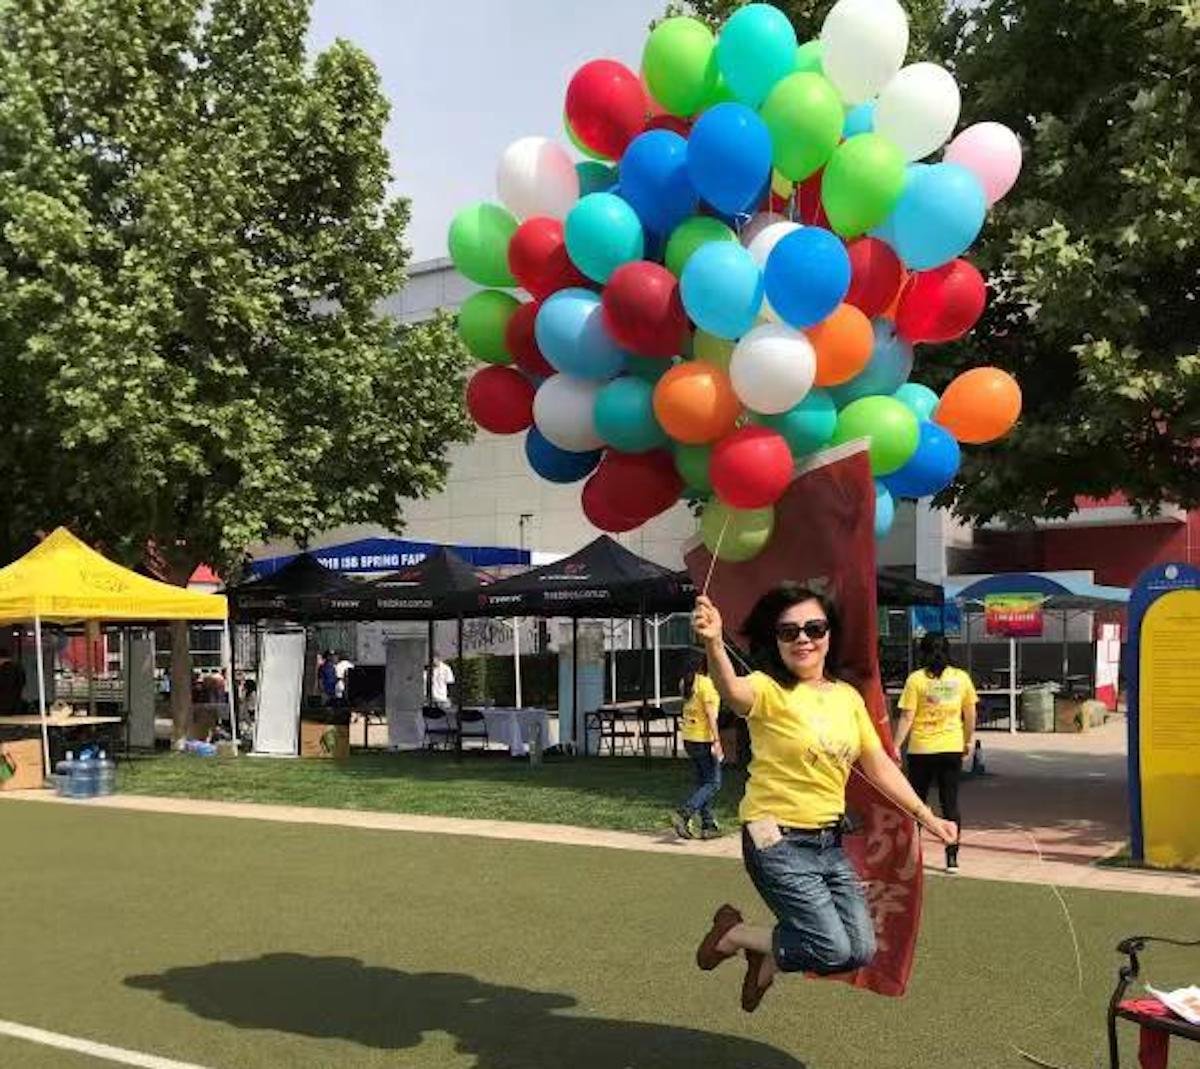 Xiu Mei Zhang leaping while holding some balloons at a fair